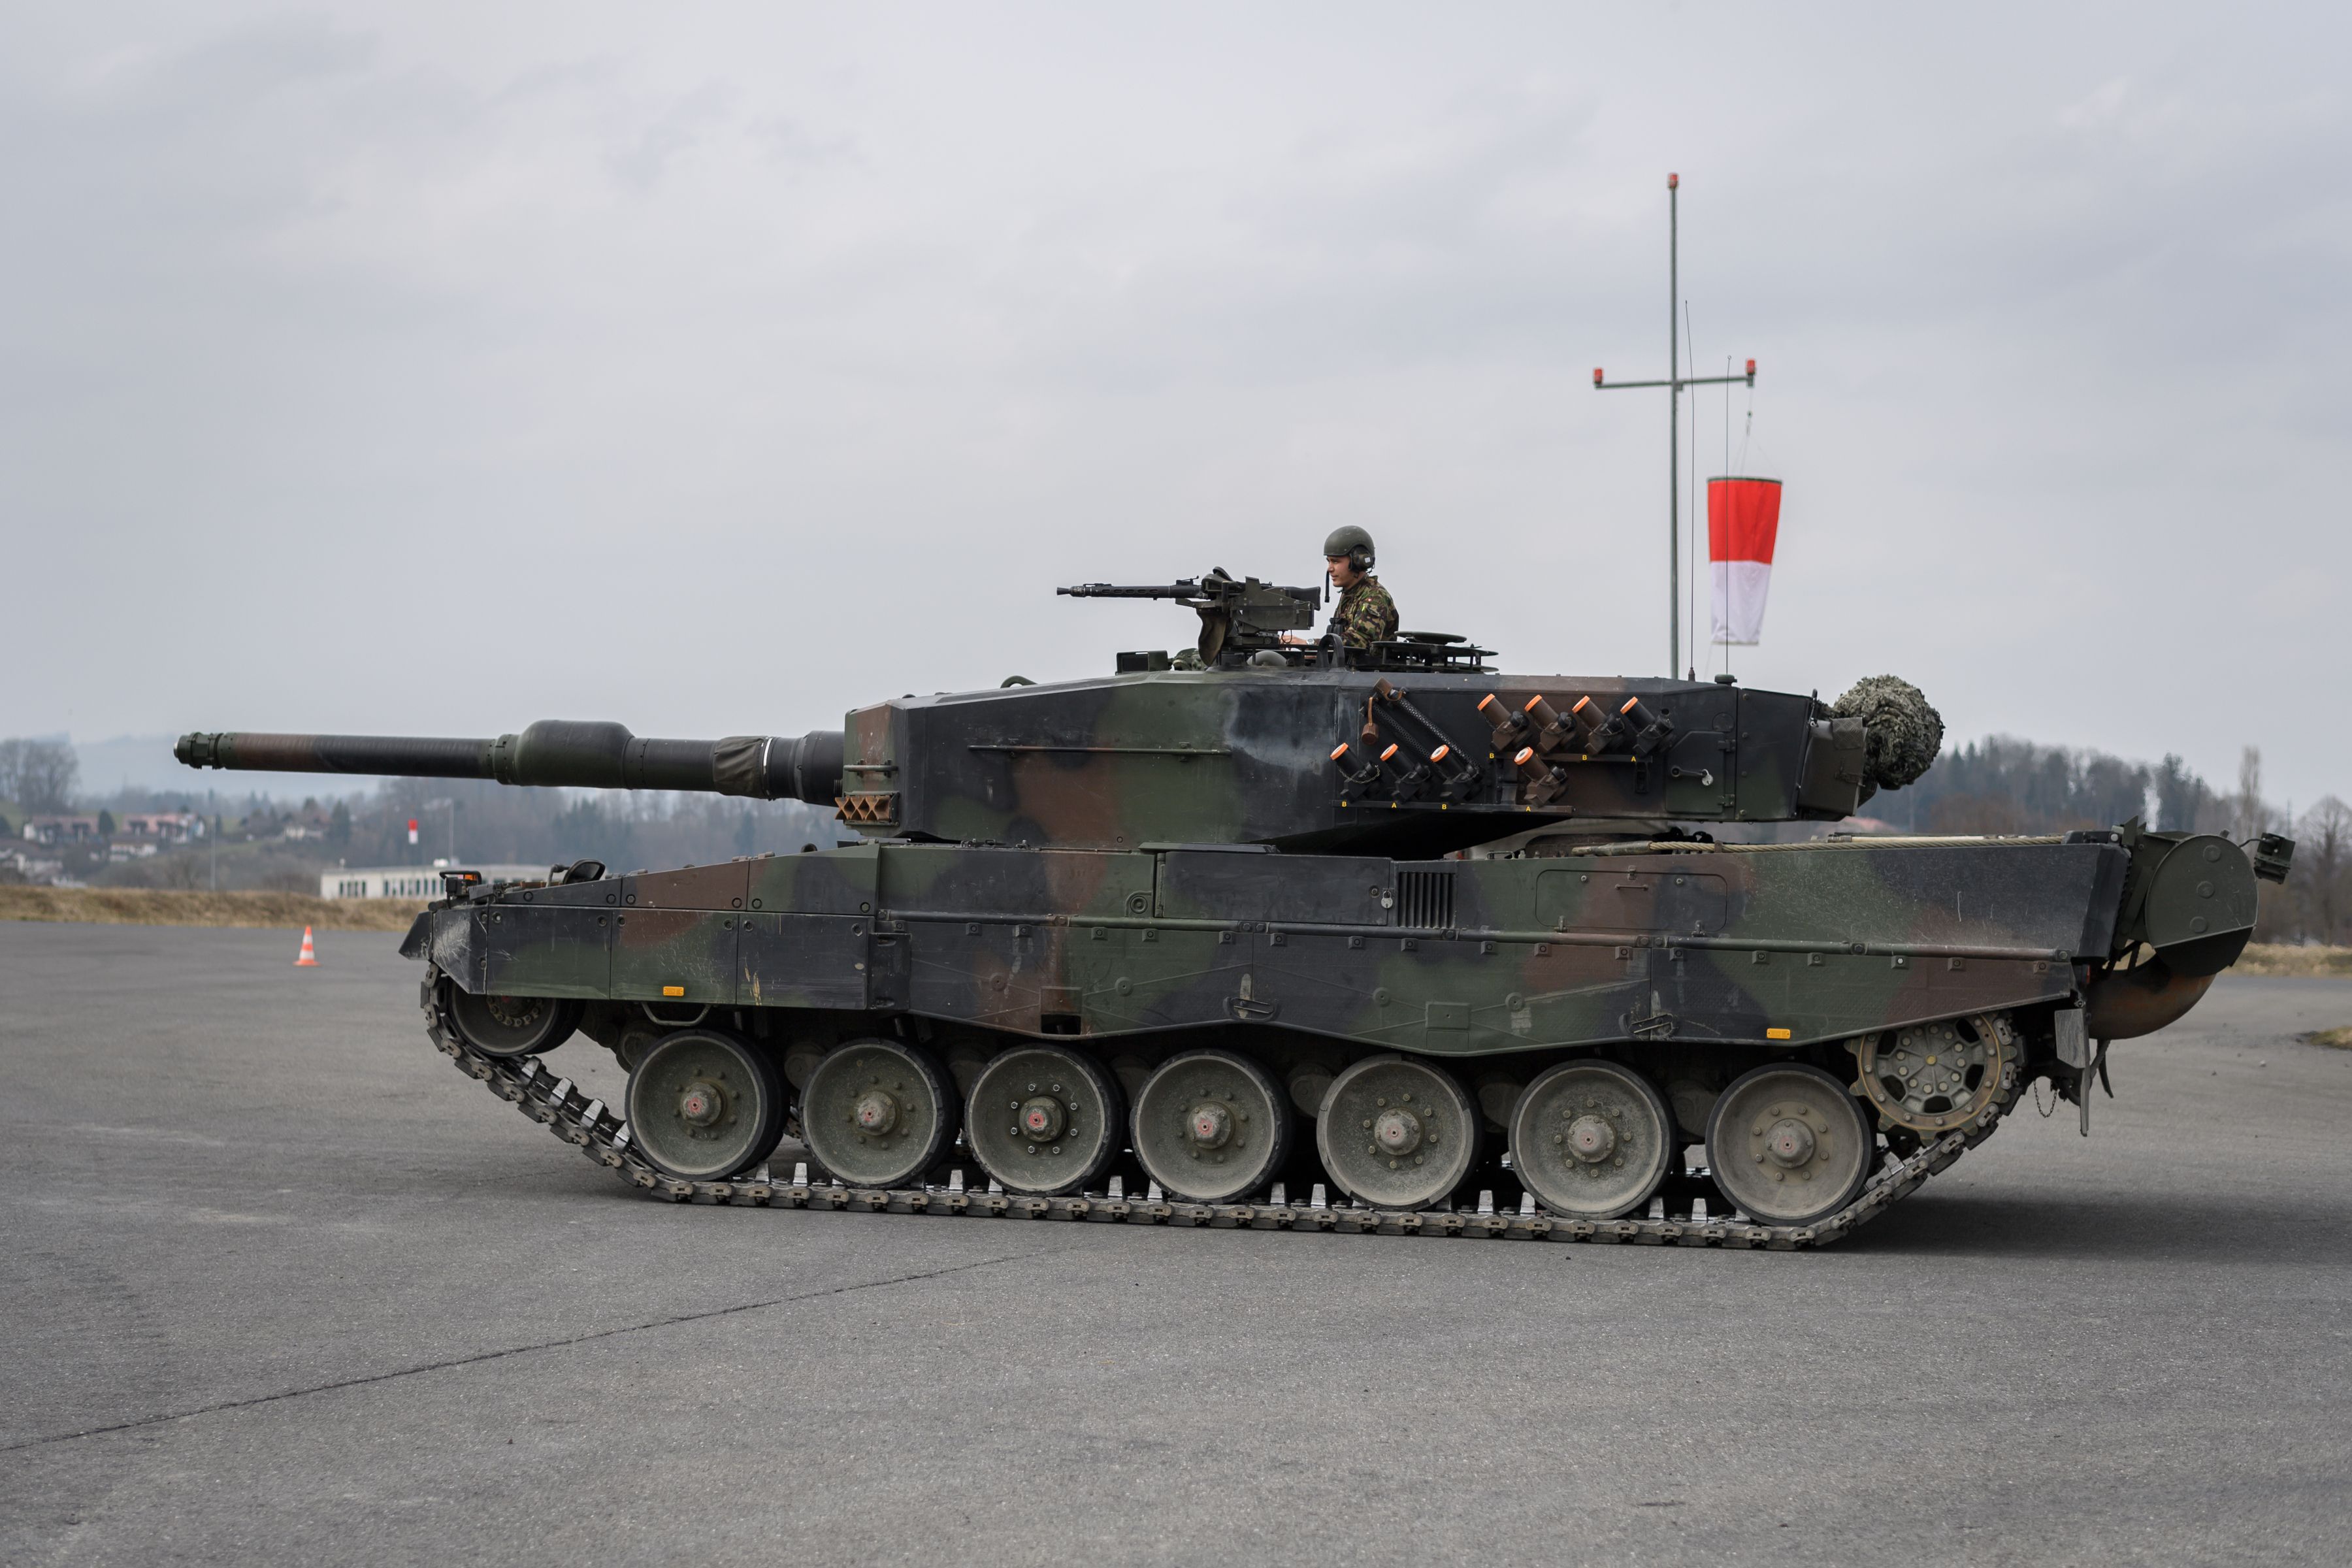 Switzerland Backs Sale of 25 Leopard Tanks to Germany to Support